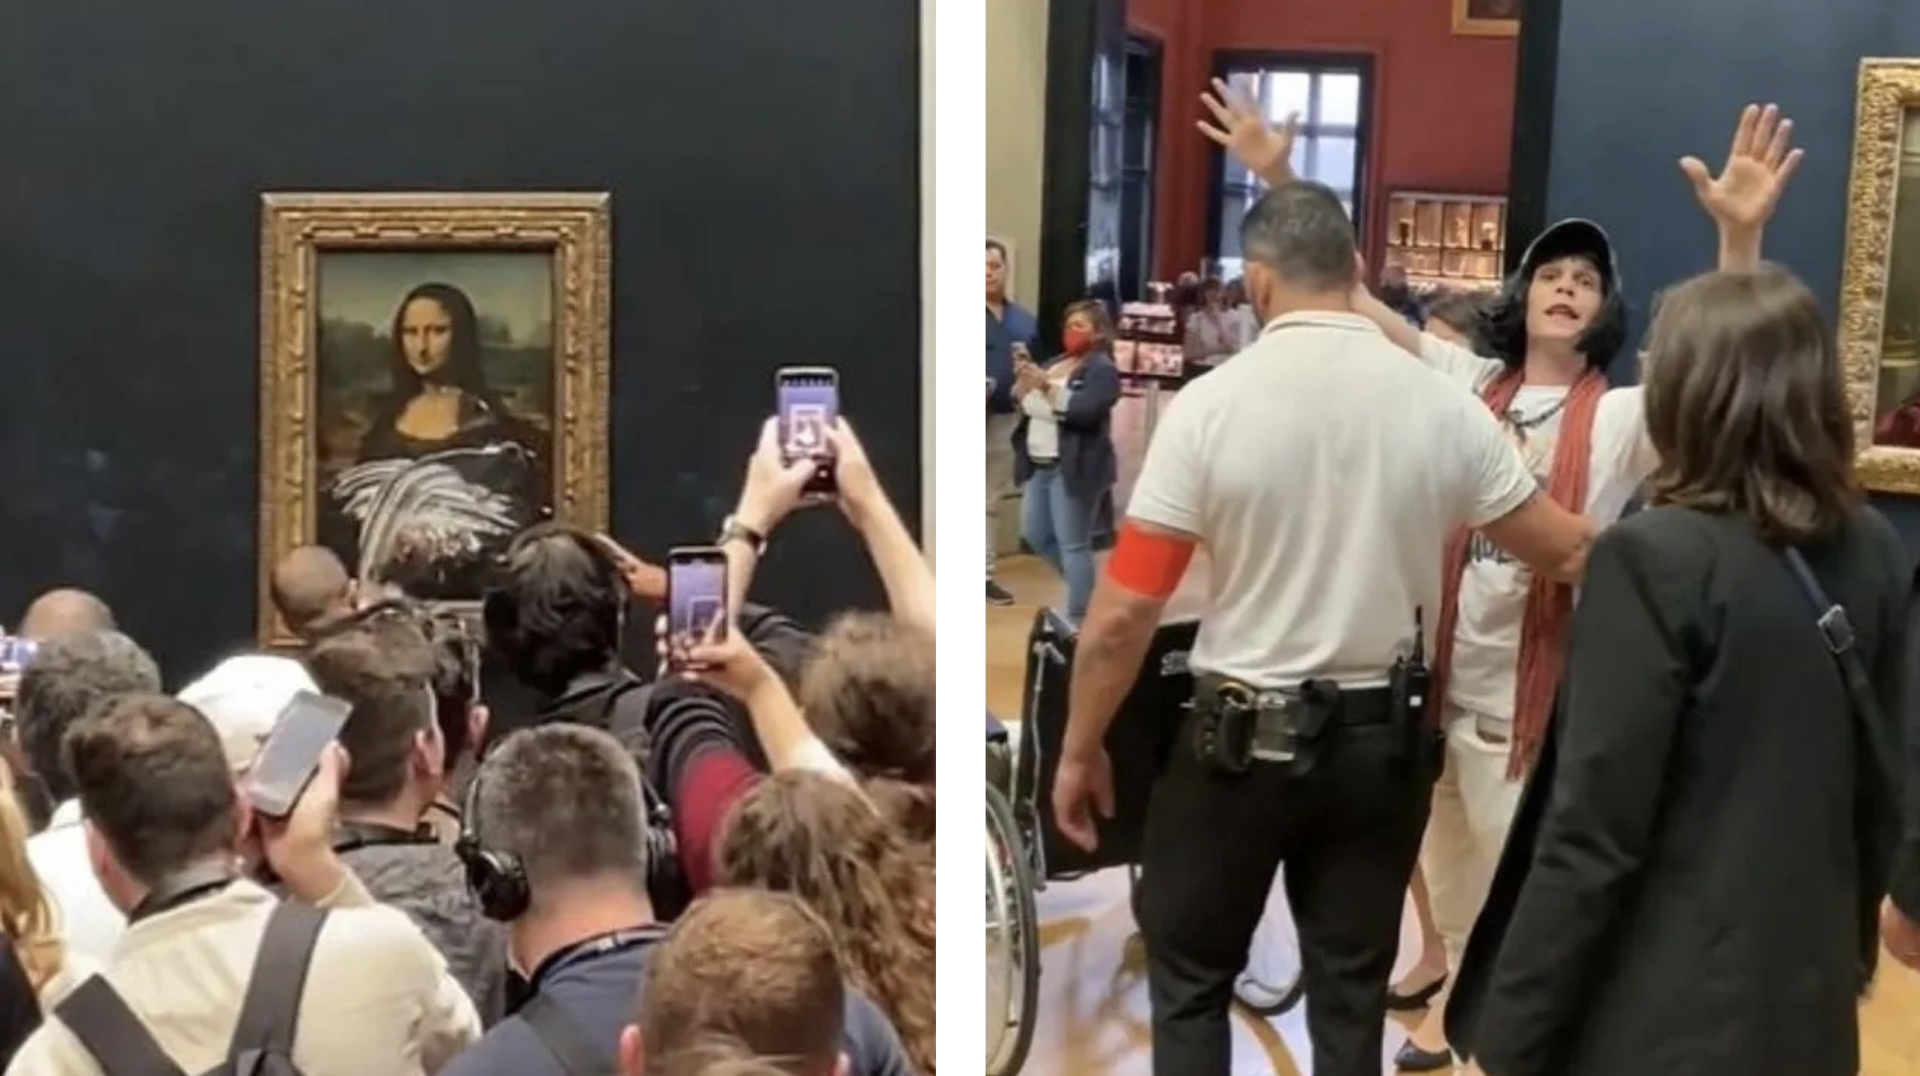 In May of 2022, a climate activist dressed as an elderly woman jumped out of a wheelchair, smeared cake all over her bulletproof glass, and threw roses at the crowd in the gallery until he was taken into custody by museum security.